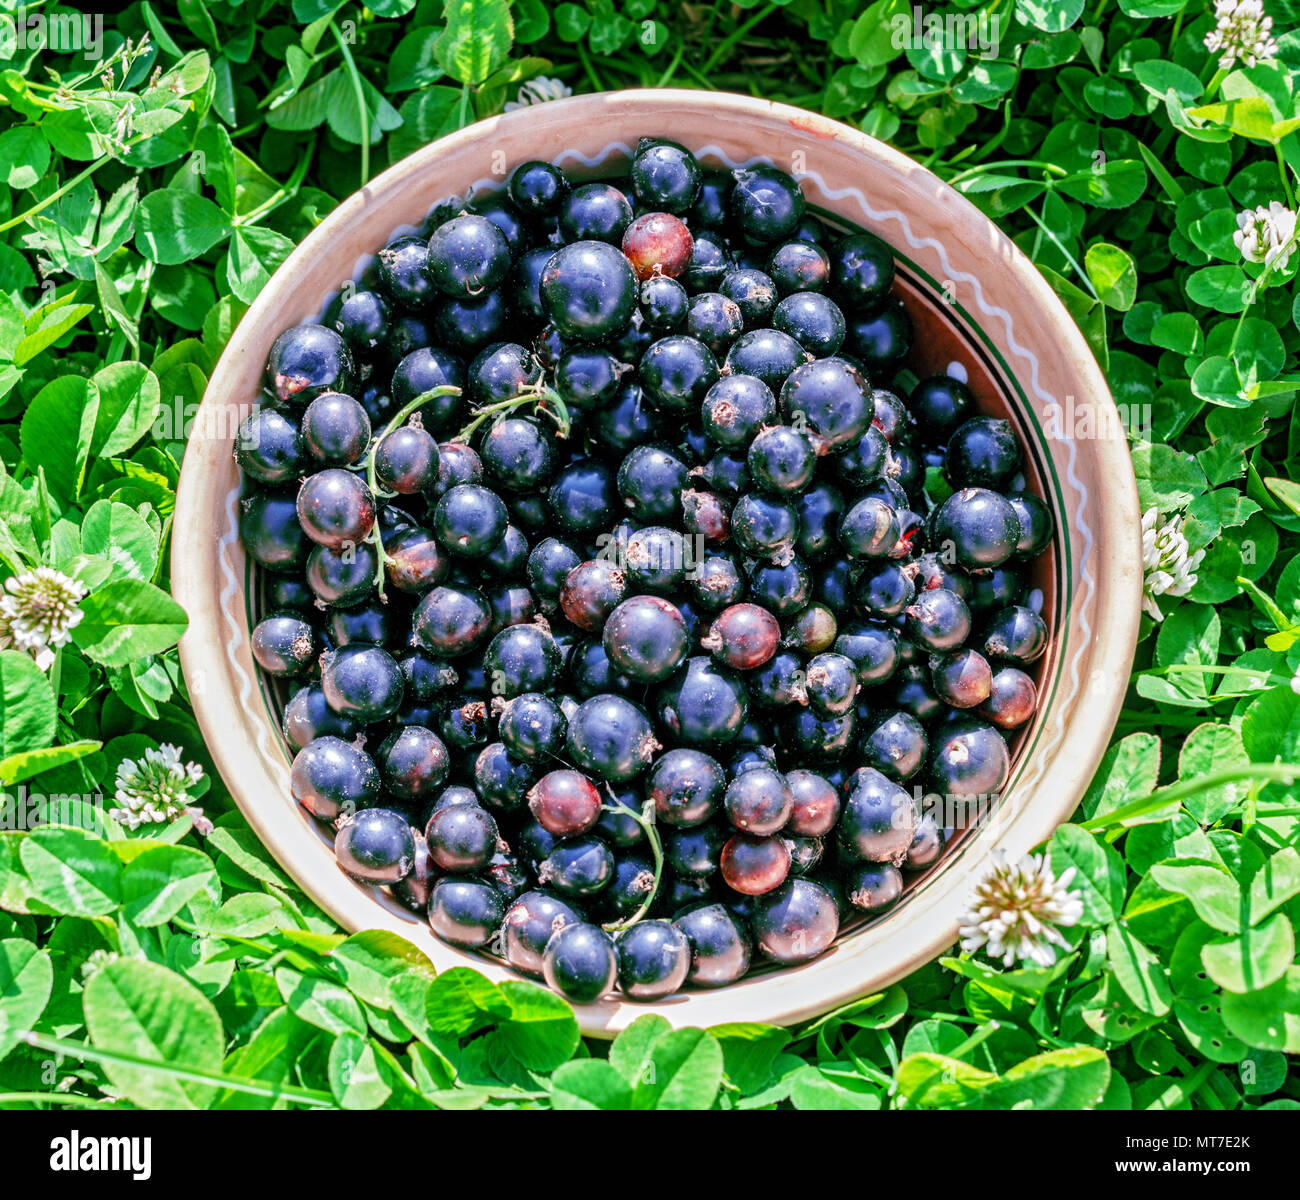 Fresh ripe black currant in bowl on grass Stock Photo